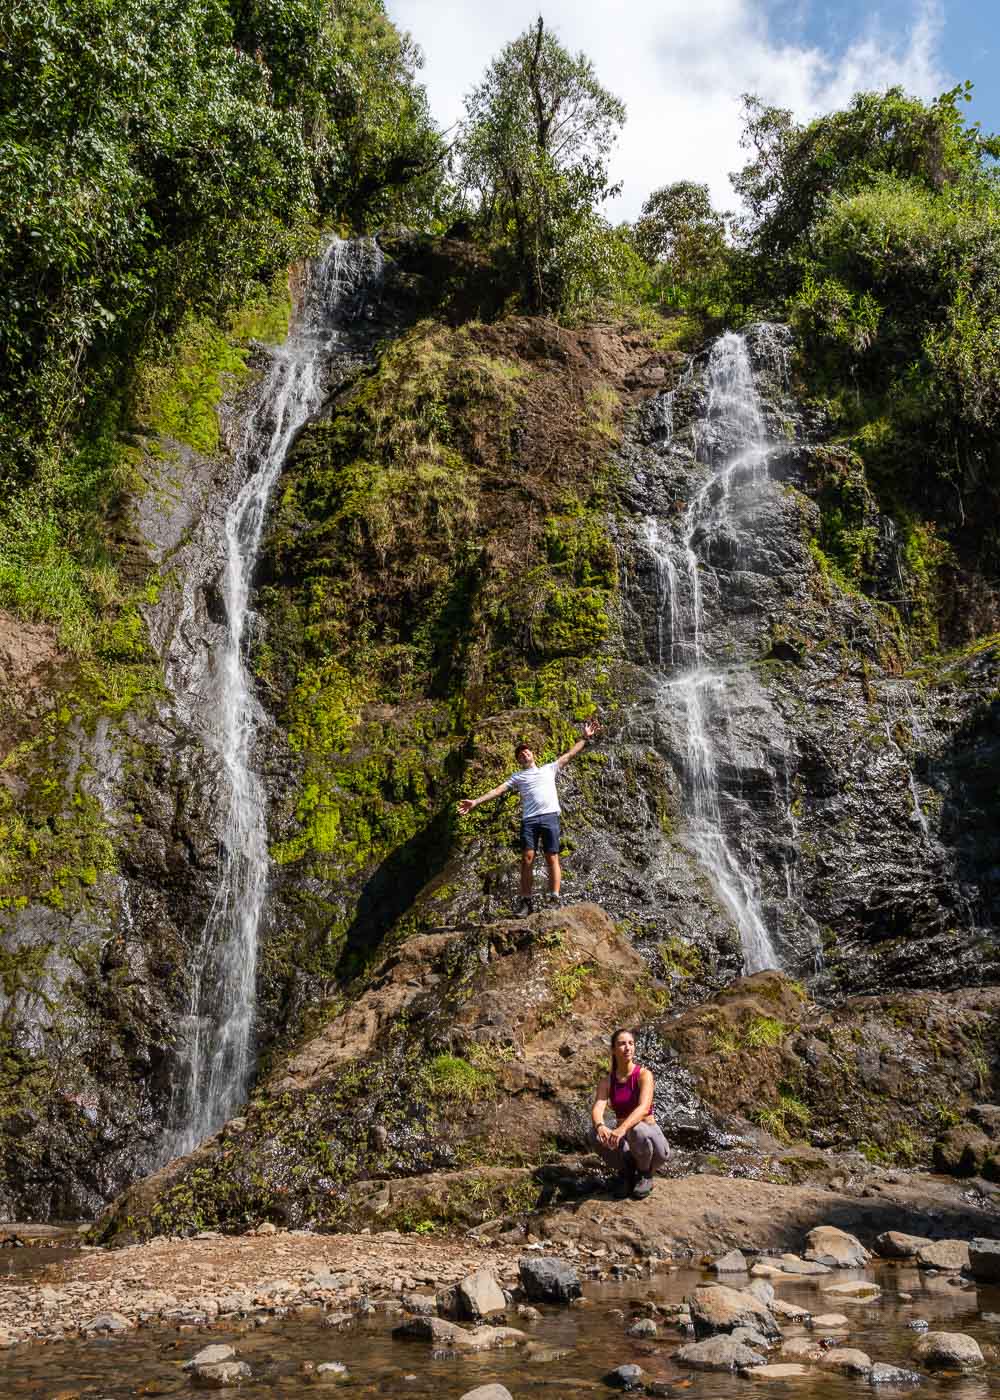 Ryan standing on a rock on the middle Cascada la Escalera while Sara squats in front of it.